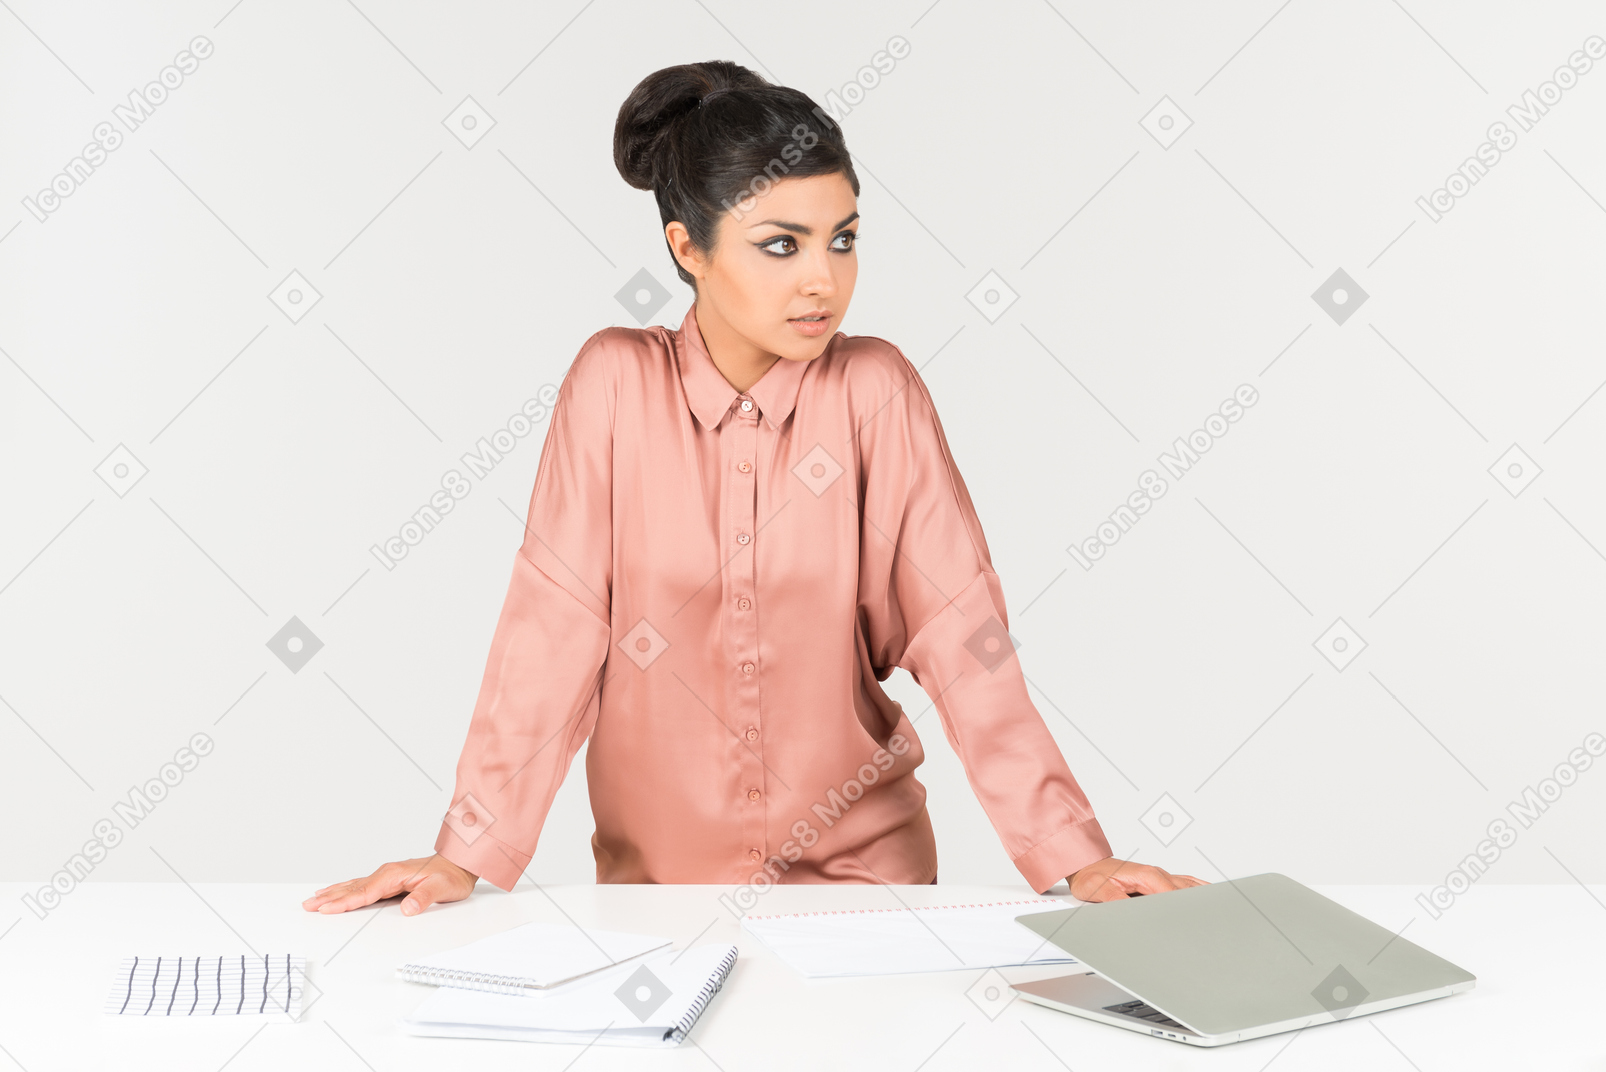 Young indian office worker standing near the table with laptop on it